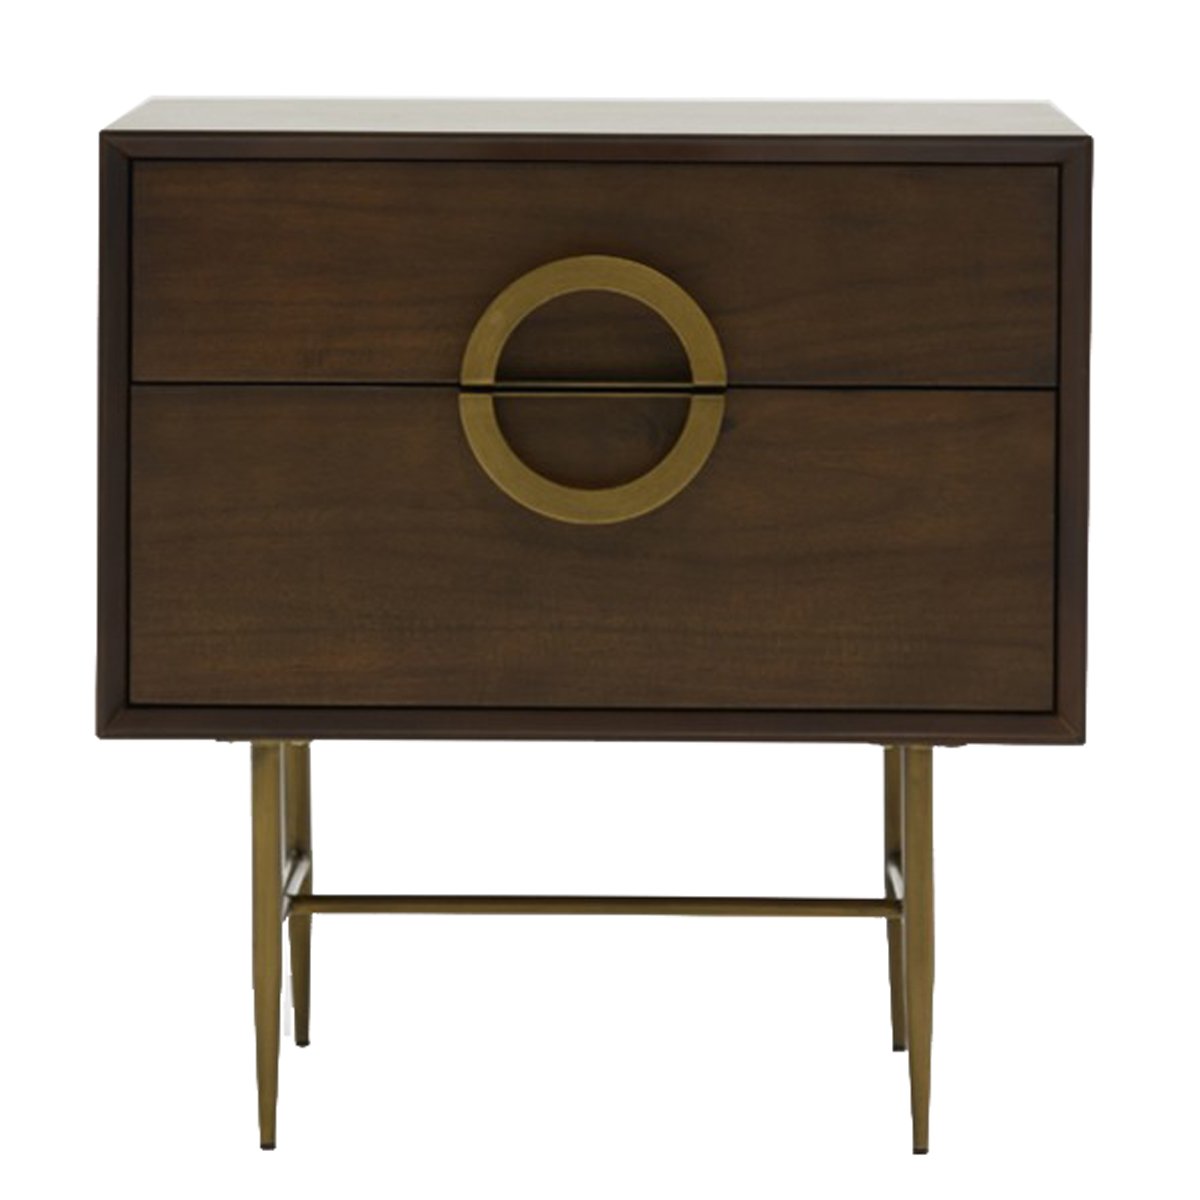 Benzara BM214767 Wooden Nightstand with 2 Drawers and Brass Semi Circle Handles